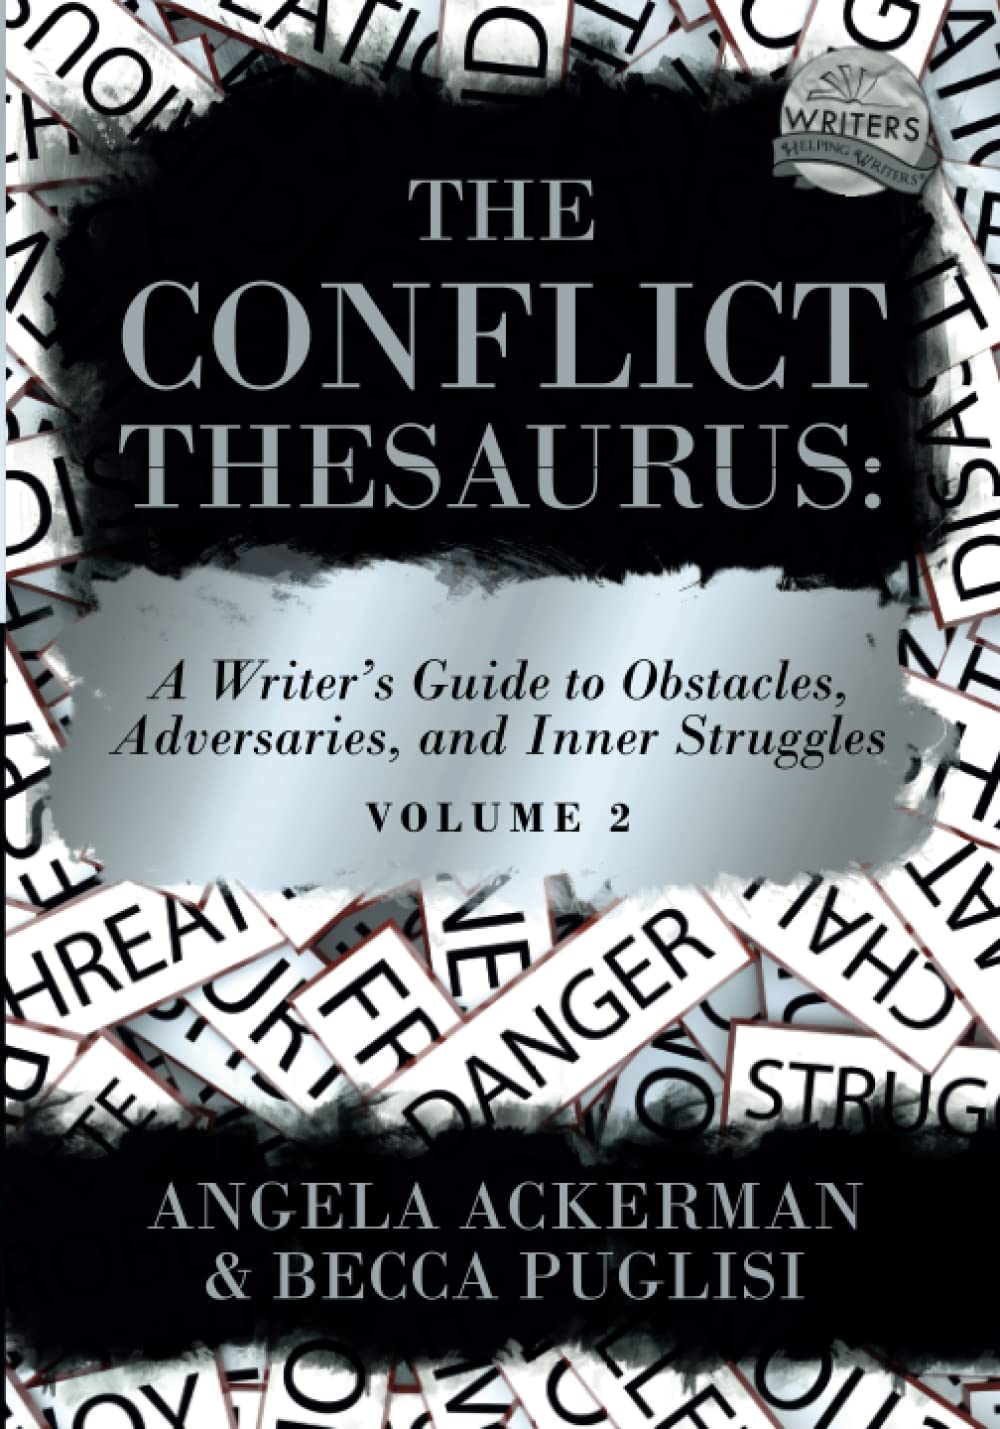 The Conflict Thesaurus: A Writers Guide to Obstacles, Adversaries, and Inner Struggles (Volume 2) (Paperback)